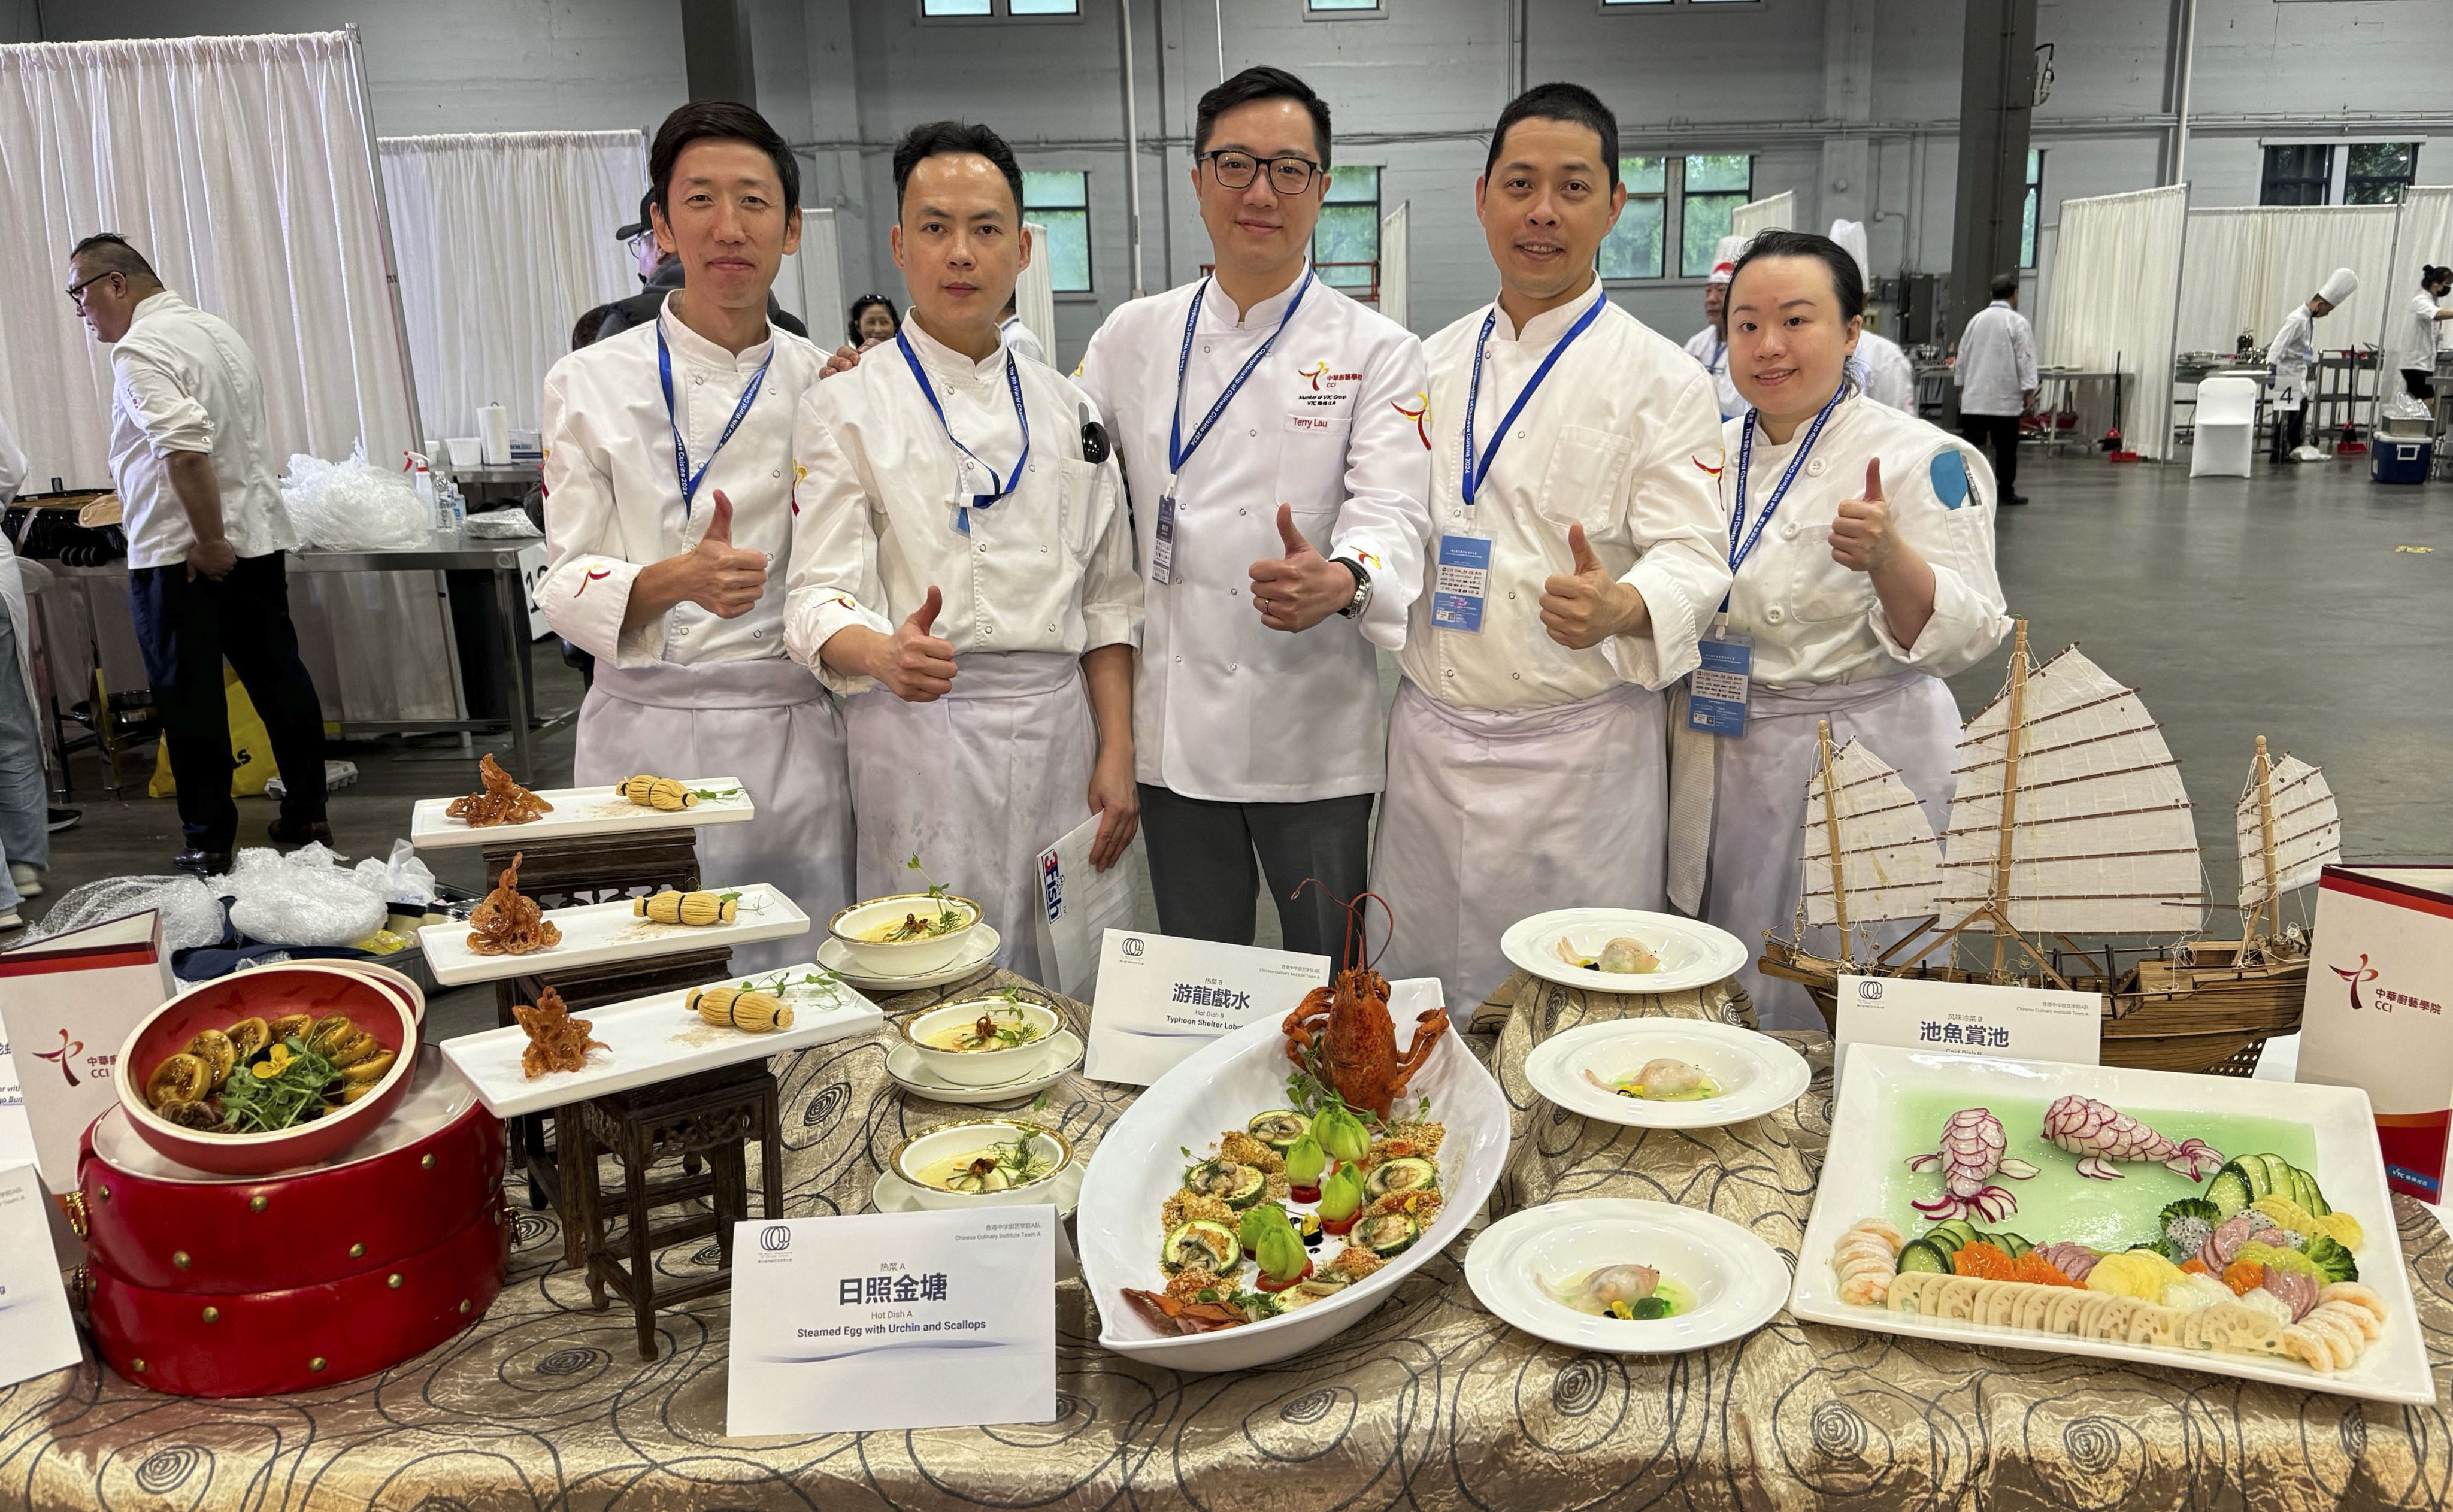 The Chinese Culinary Institute (CCI) team that won gold in the group category at the 9th World Championship of Chinese Cuisine in Vancouver, Canada, in which 70 teams took part. Photo: CCI